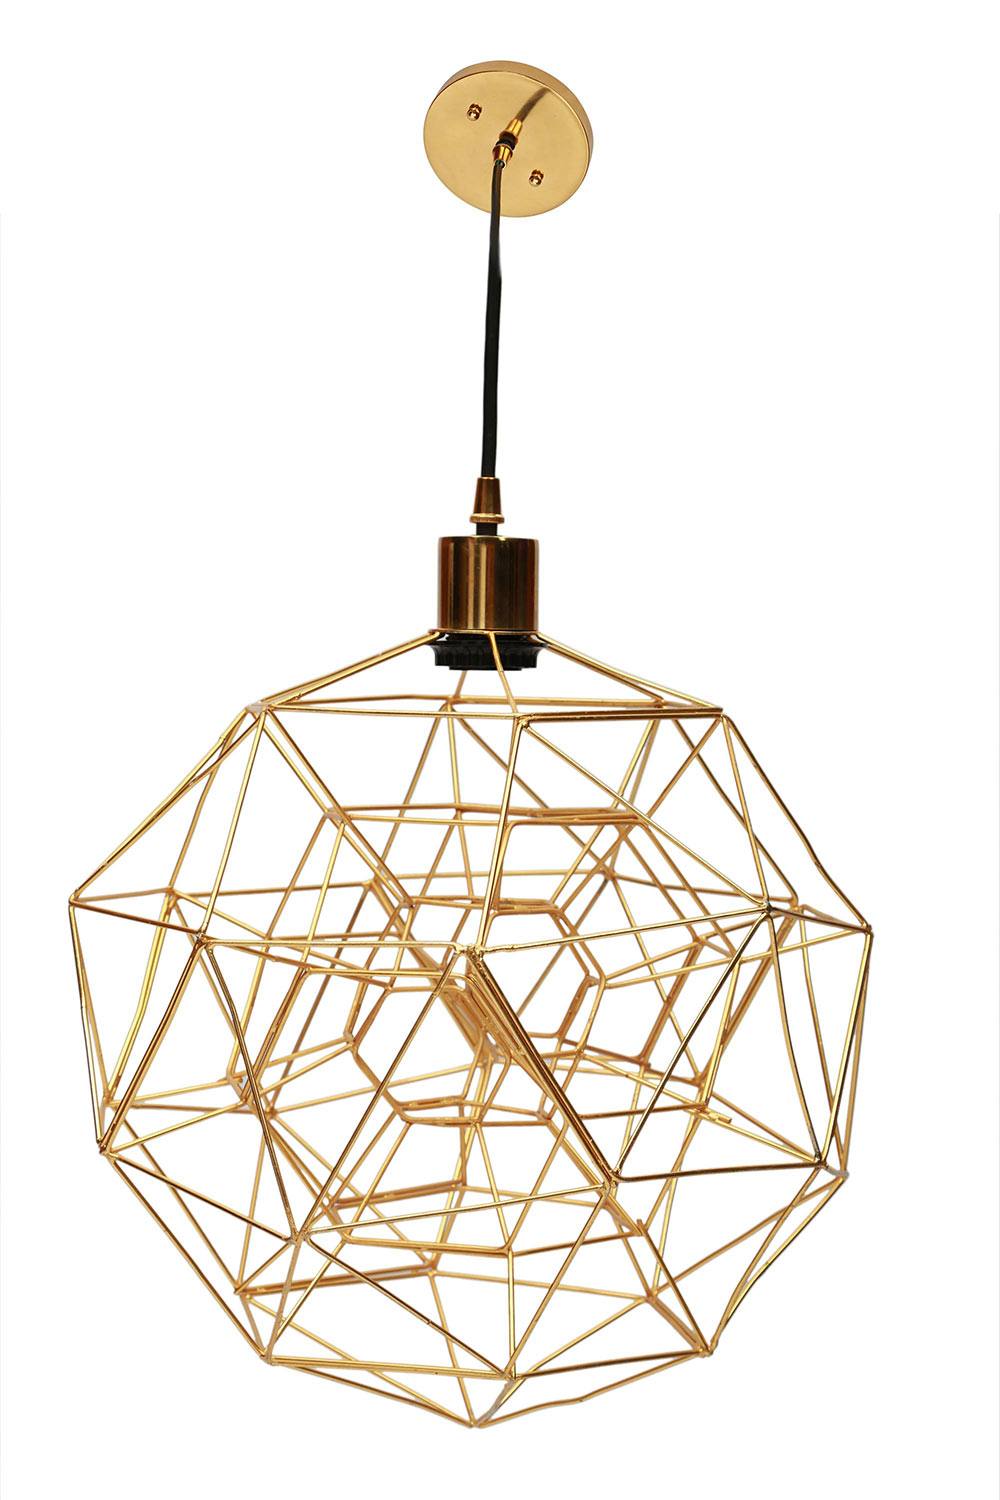 Ren-Wil Sidereal Ceiling Fixture - Gold Plated